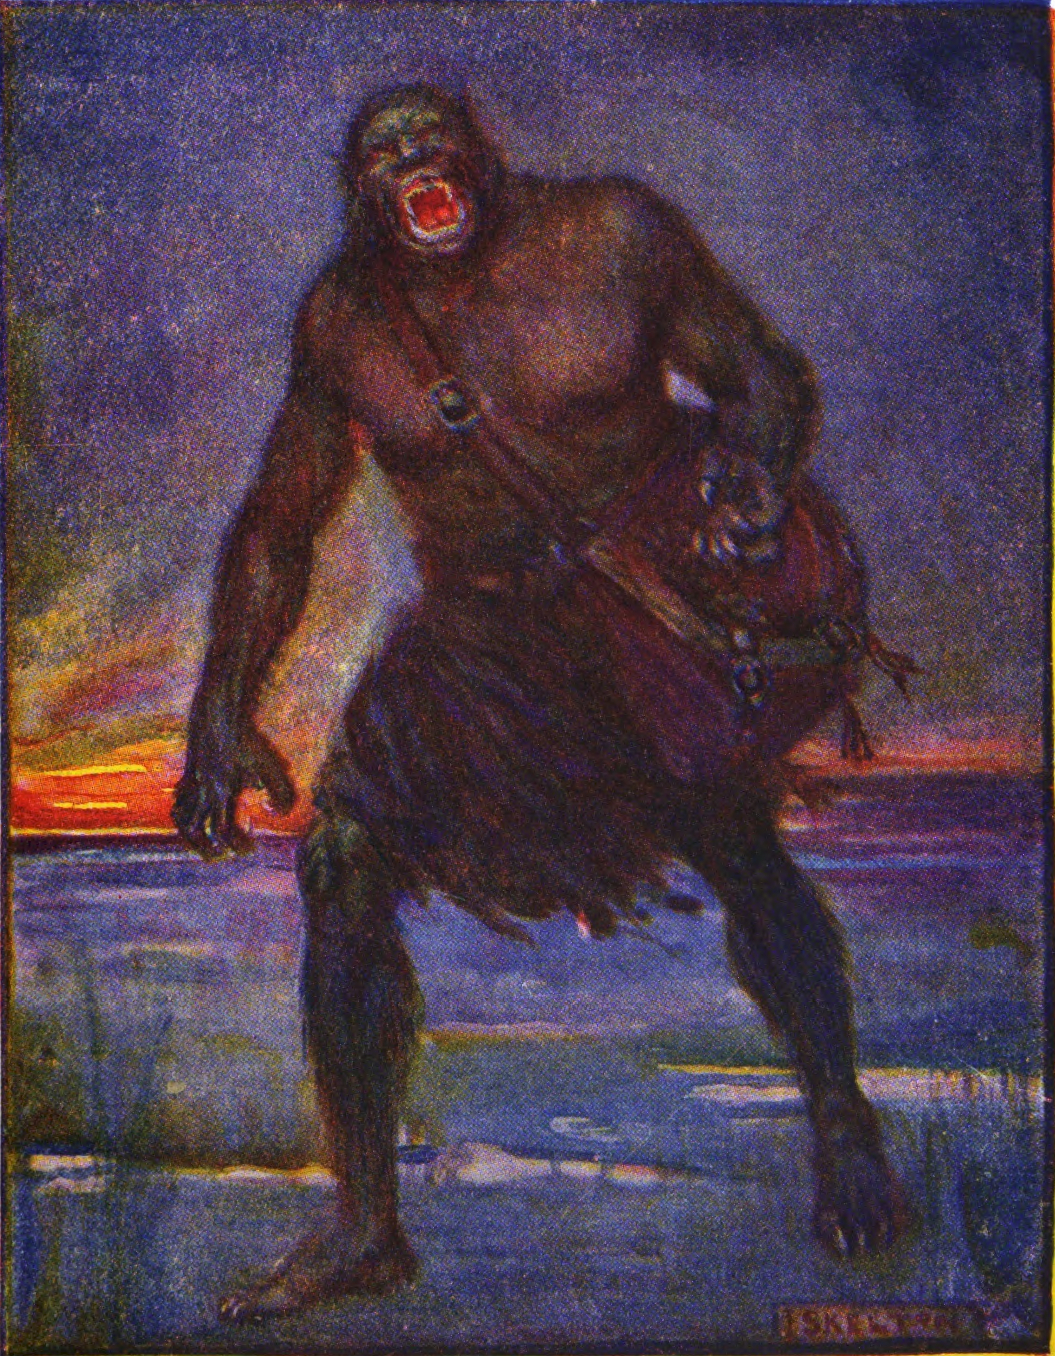 Grendel: The monster's body provided safe spaces to express the customs and practices that were forbidden and prohibited within society.